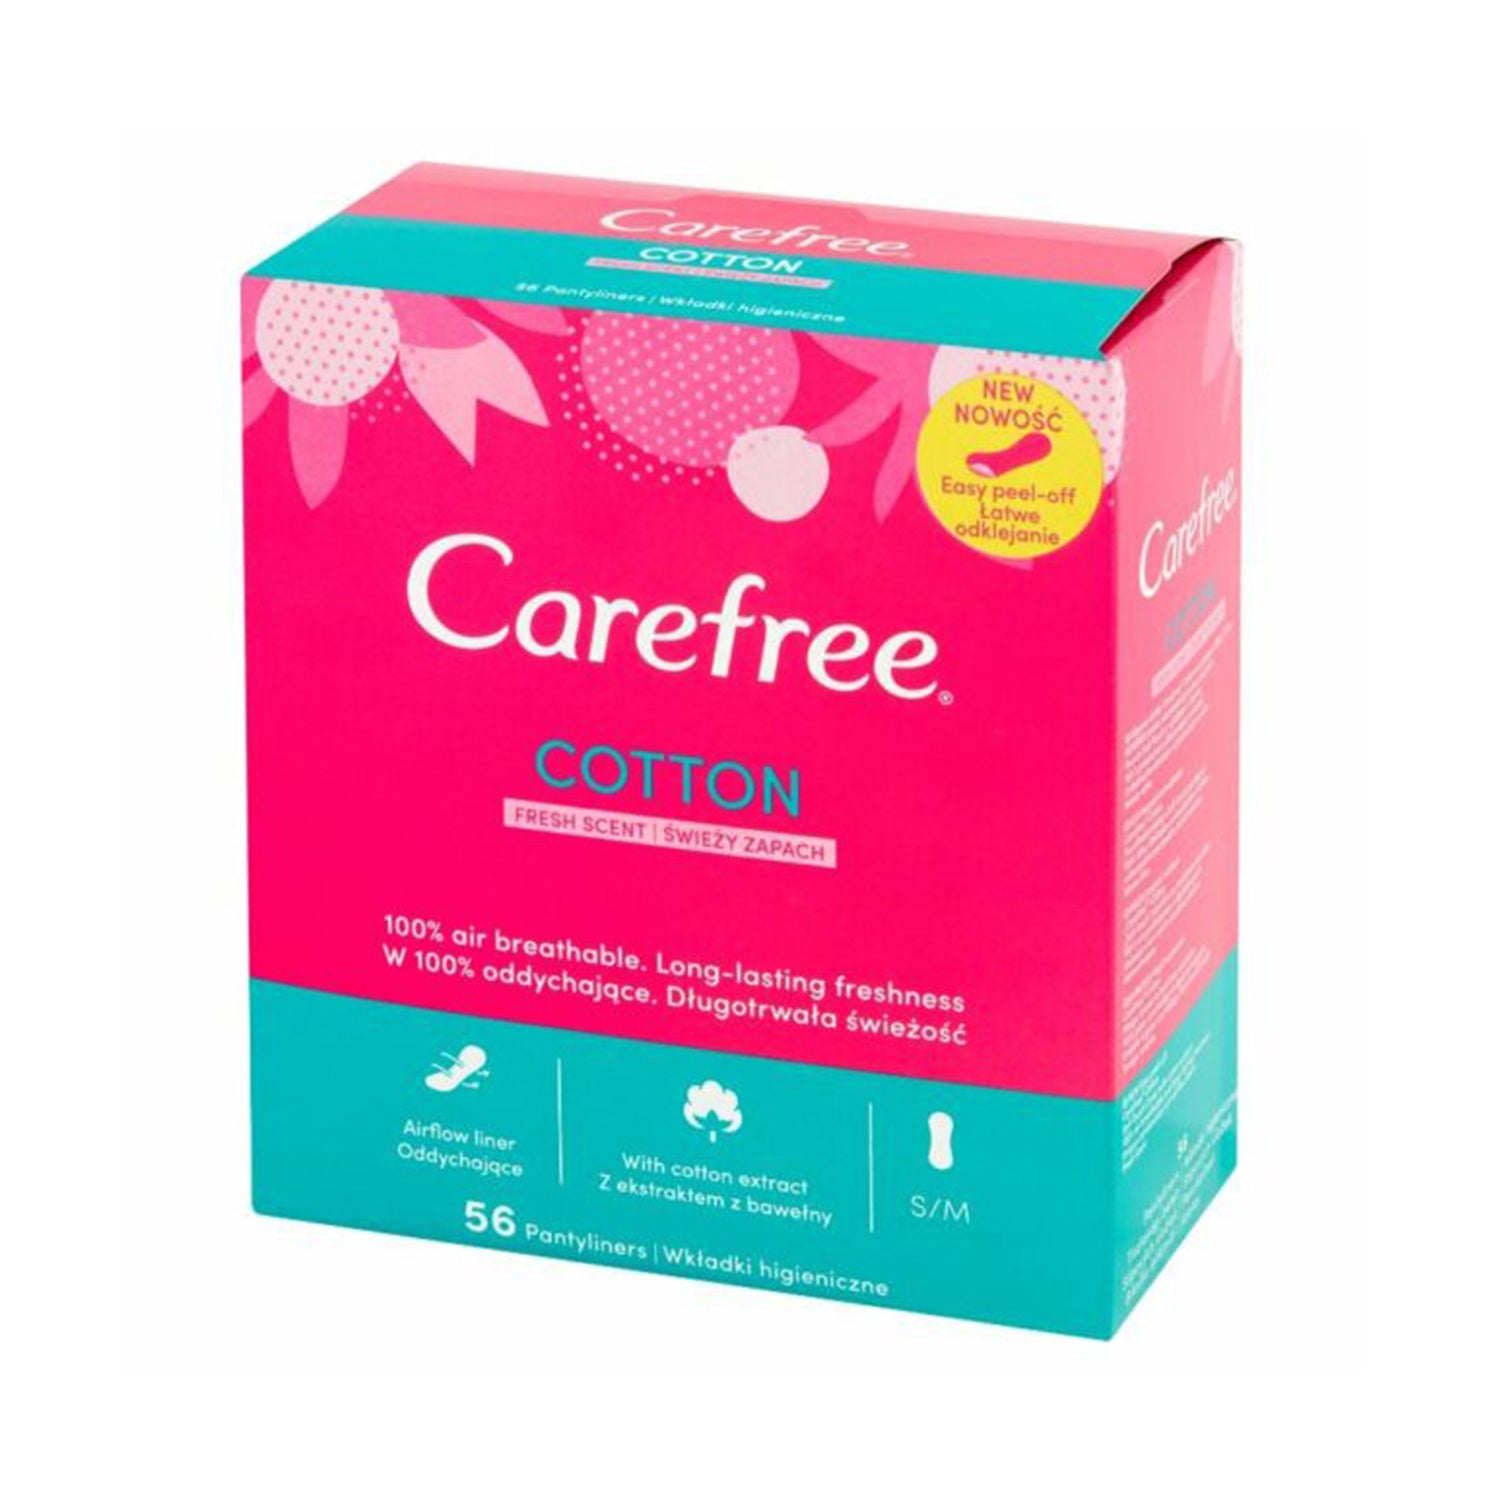 Carefree Cotton Fresh Scent Pantyliners 